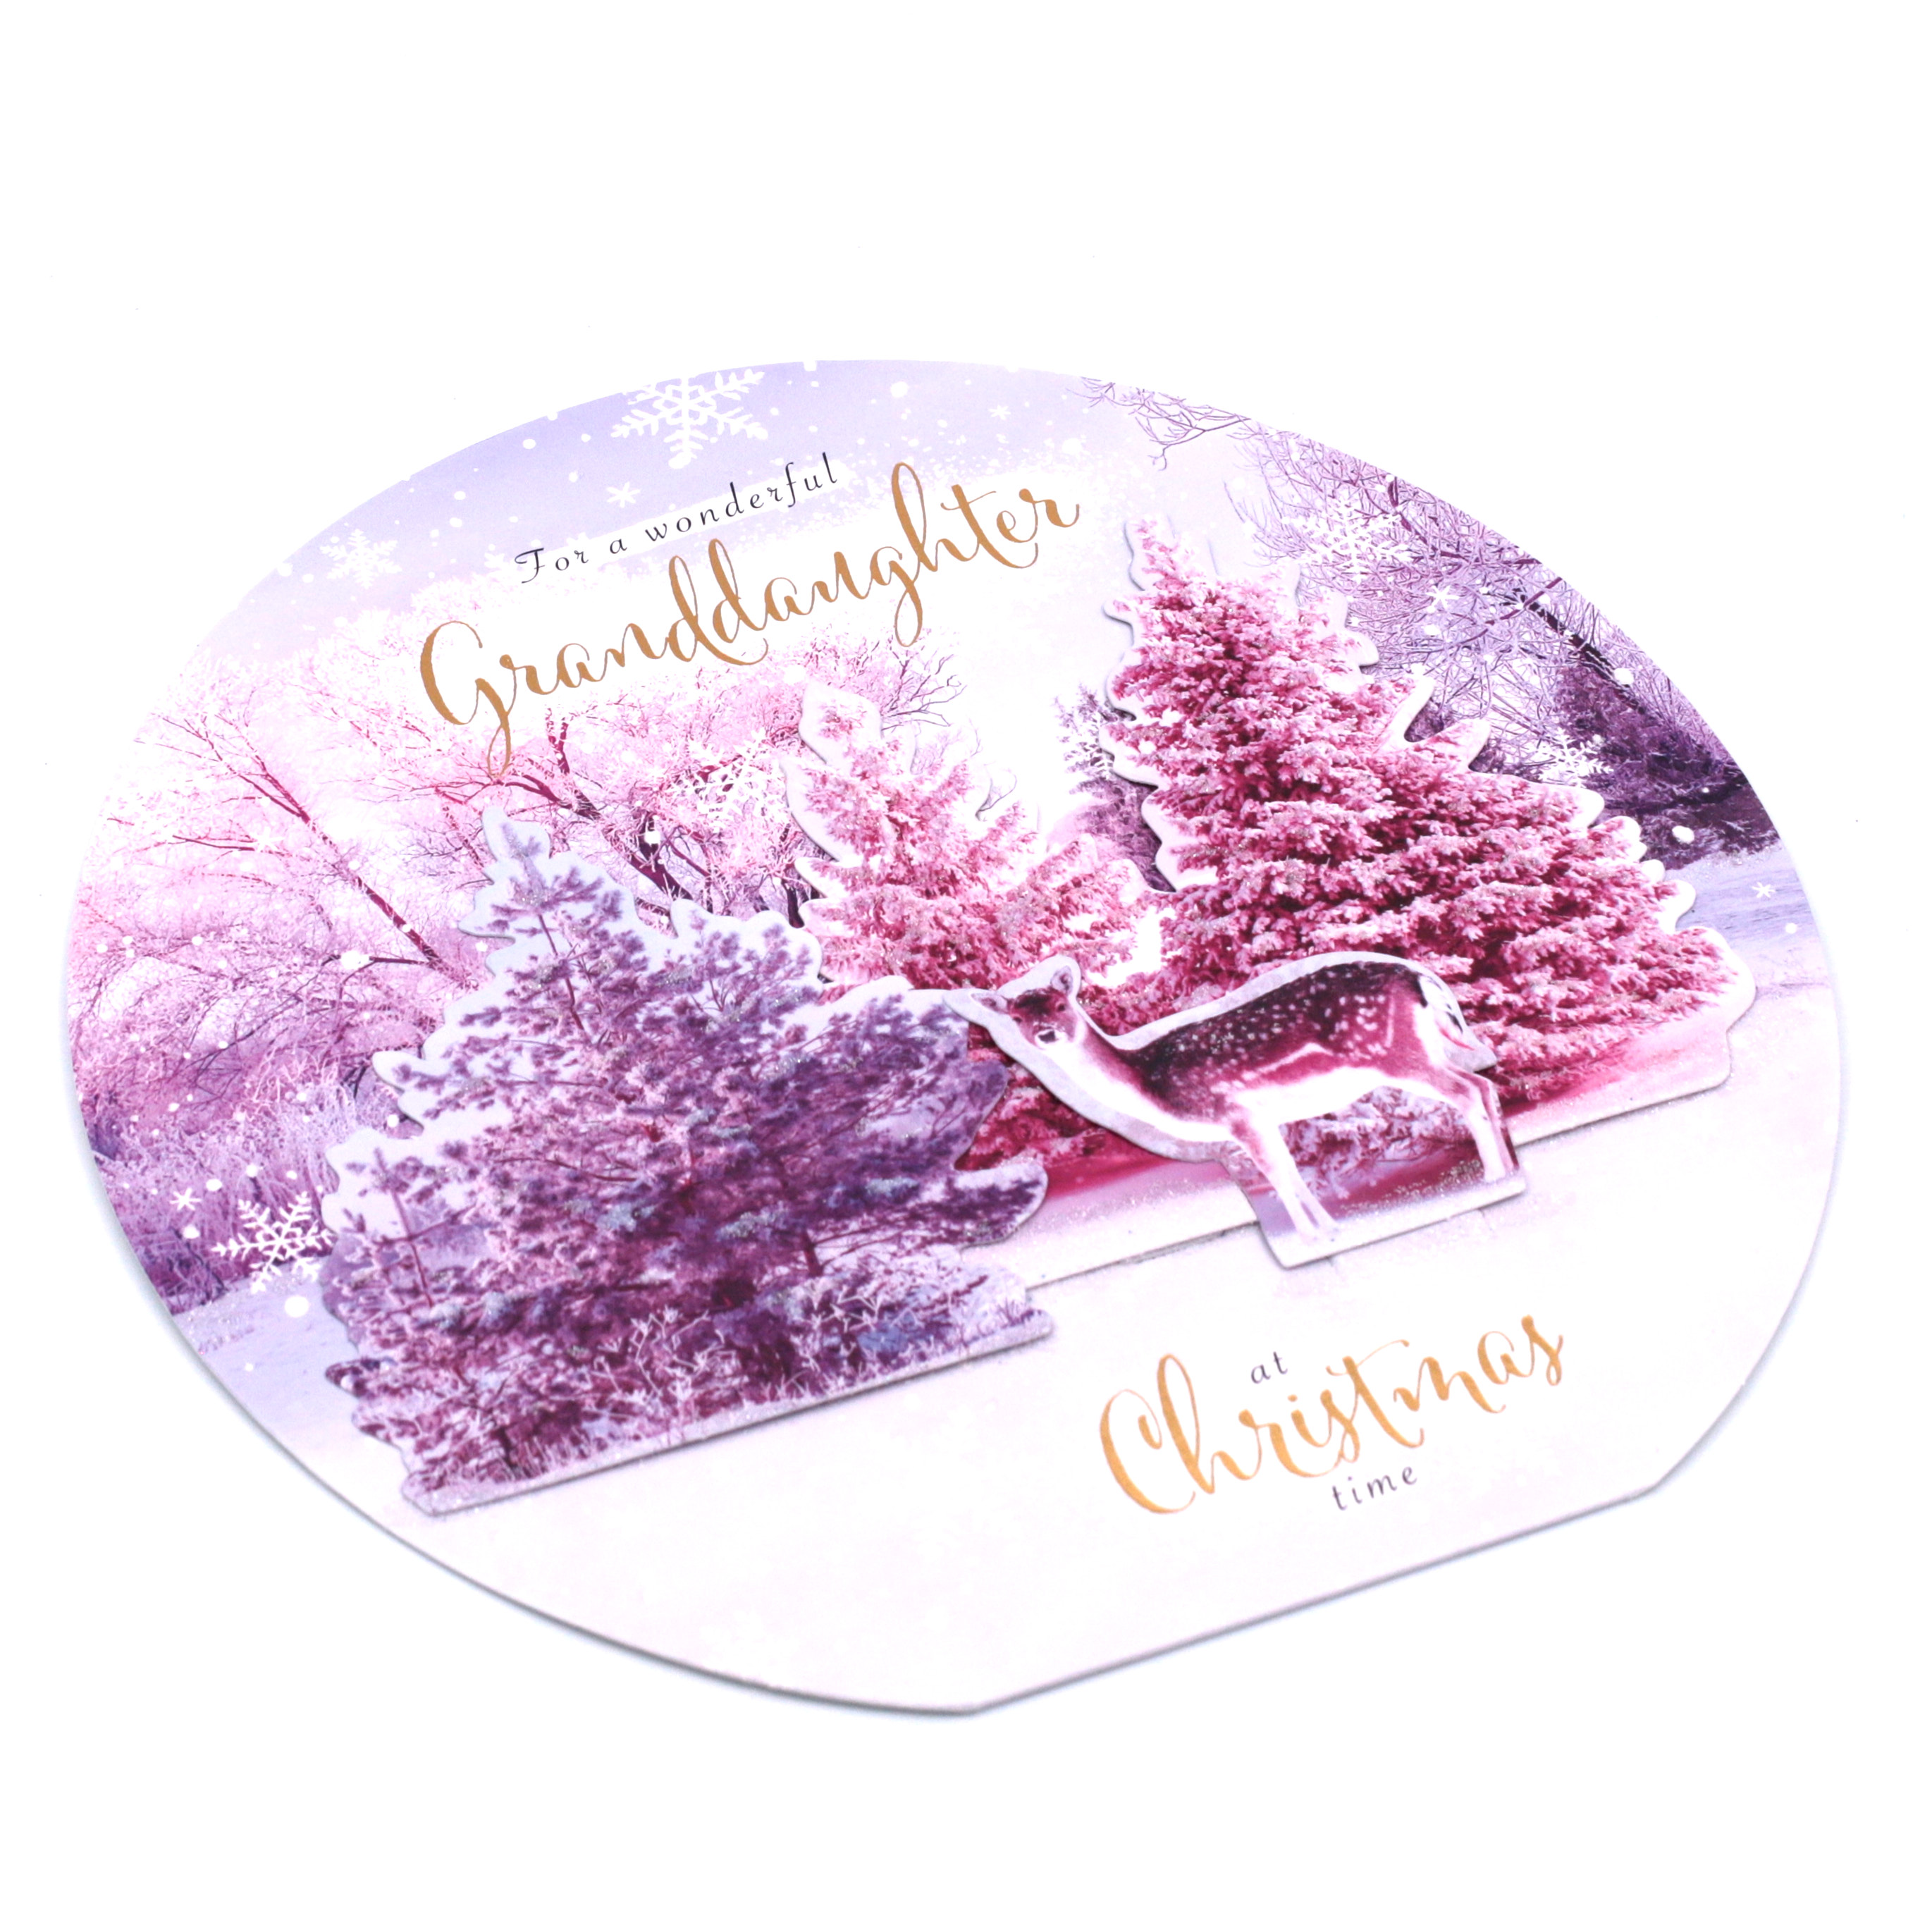 Exquisite Collection Christmas Card - Wonderful Granddaughter, Christmas Deer 3D Card